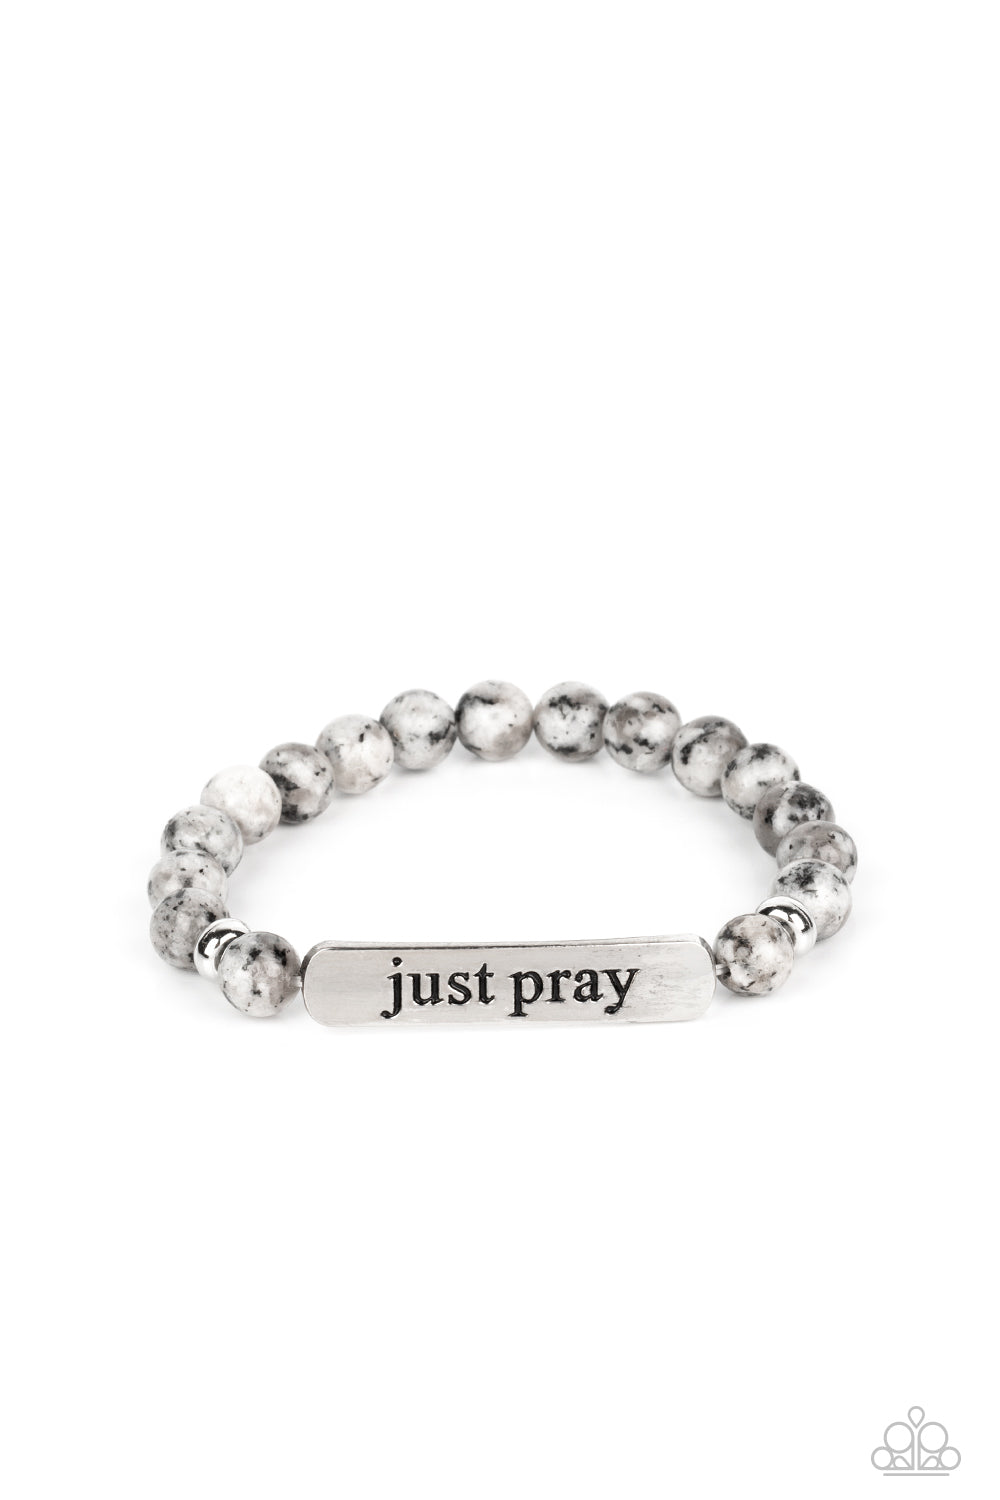 Just Pray - Silver and Gray Stone Bracelet - Paparazzi Accessories - Smooth, gray speckled stones are stretched across the wrist on an elastic stretchy band, with accents of silver beads sprinkled in. Meeting in the center of the stony display, a curved rectangular bar is stamped with the phrase "just pray" for an inspiring finish. Sold as one individual bracelet.